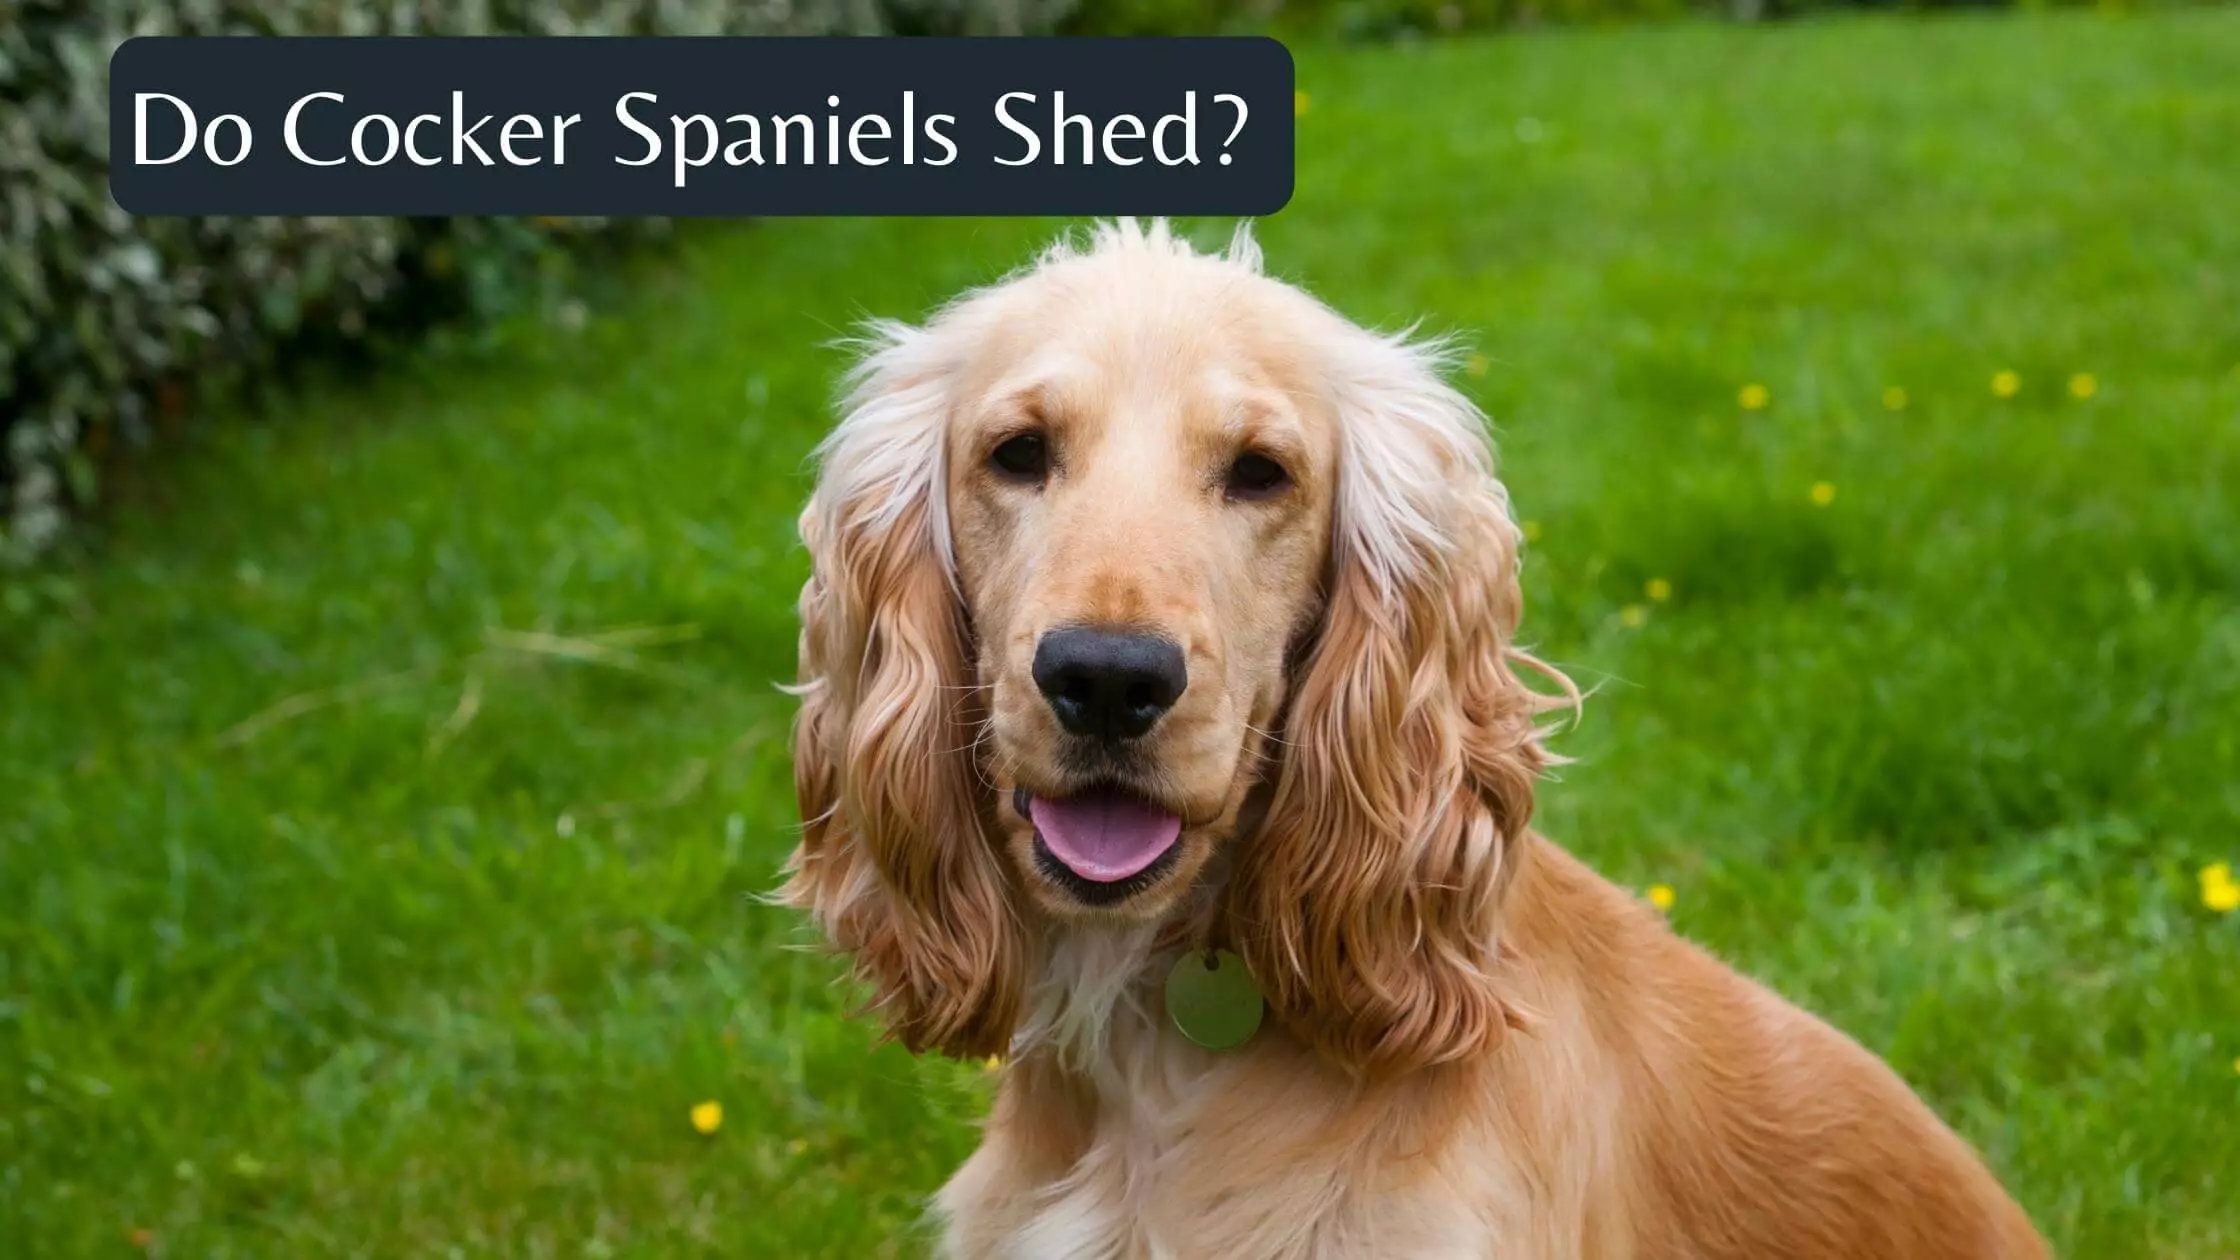 Do Cocker Spaniels Shed?